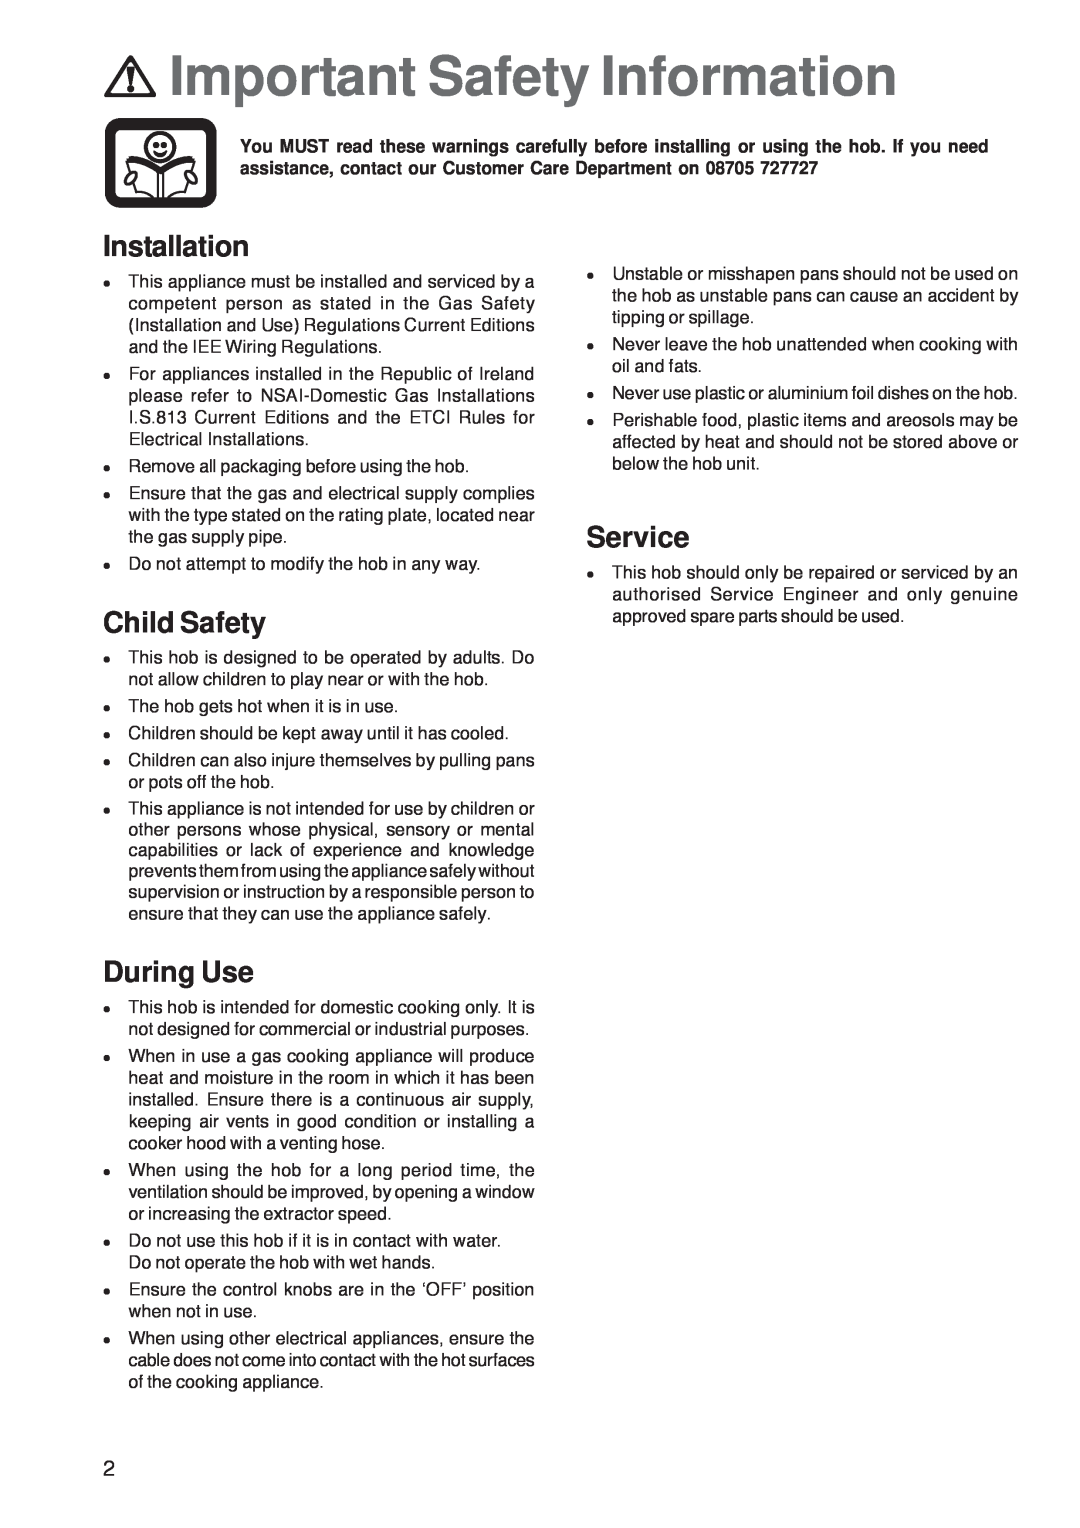 Zanussi ZGF 7820 manual Important Safety Information, Installation, Child Safety, During Use, Service 